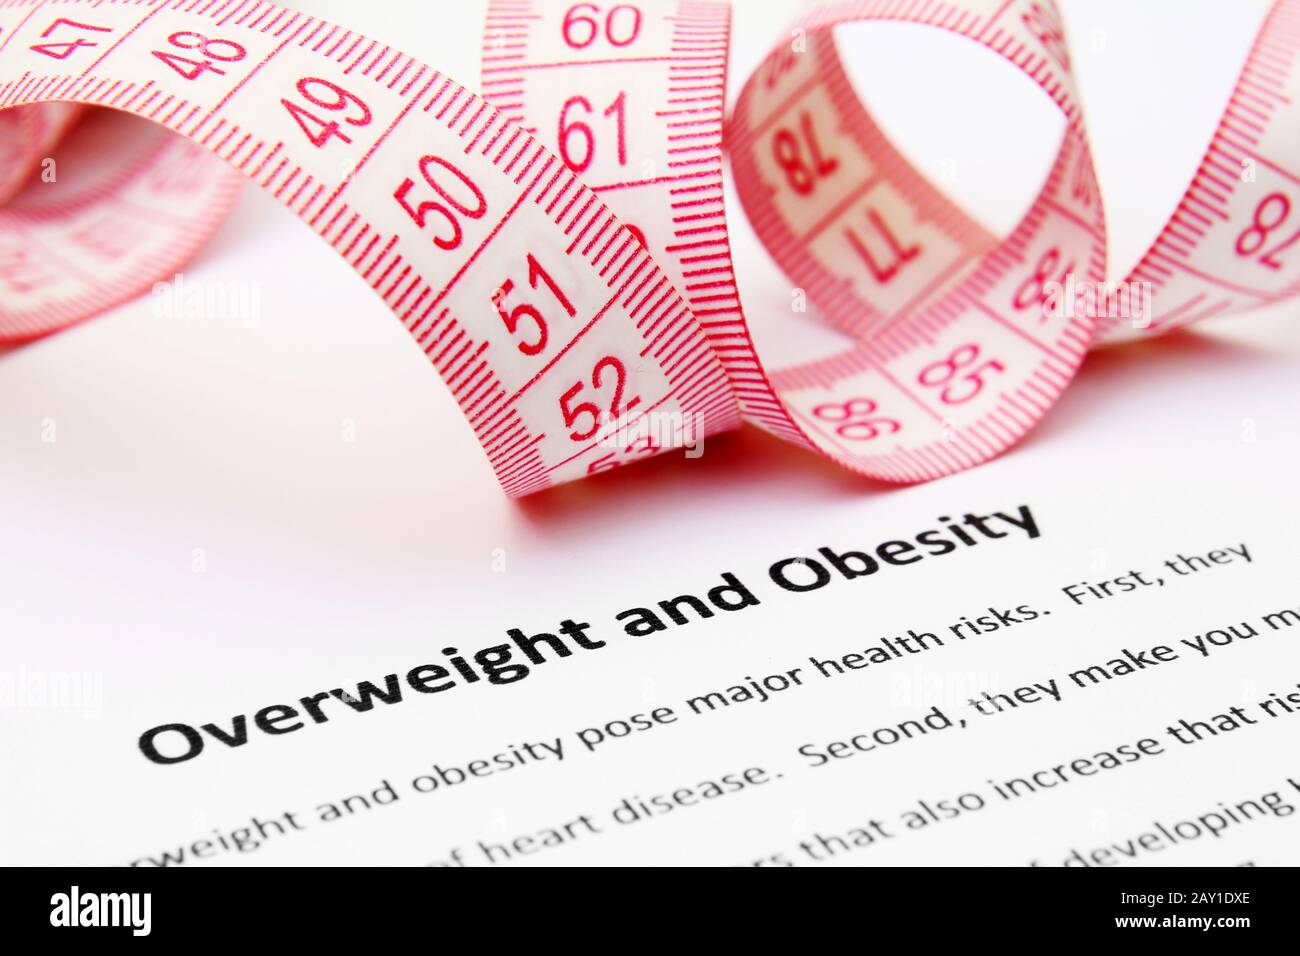 Overweight and obesity Stock Photo